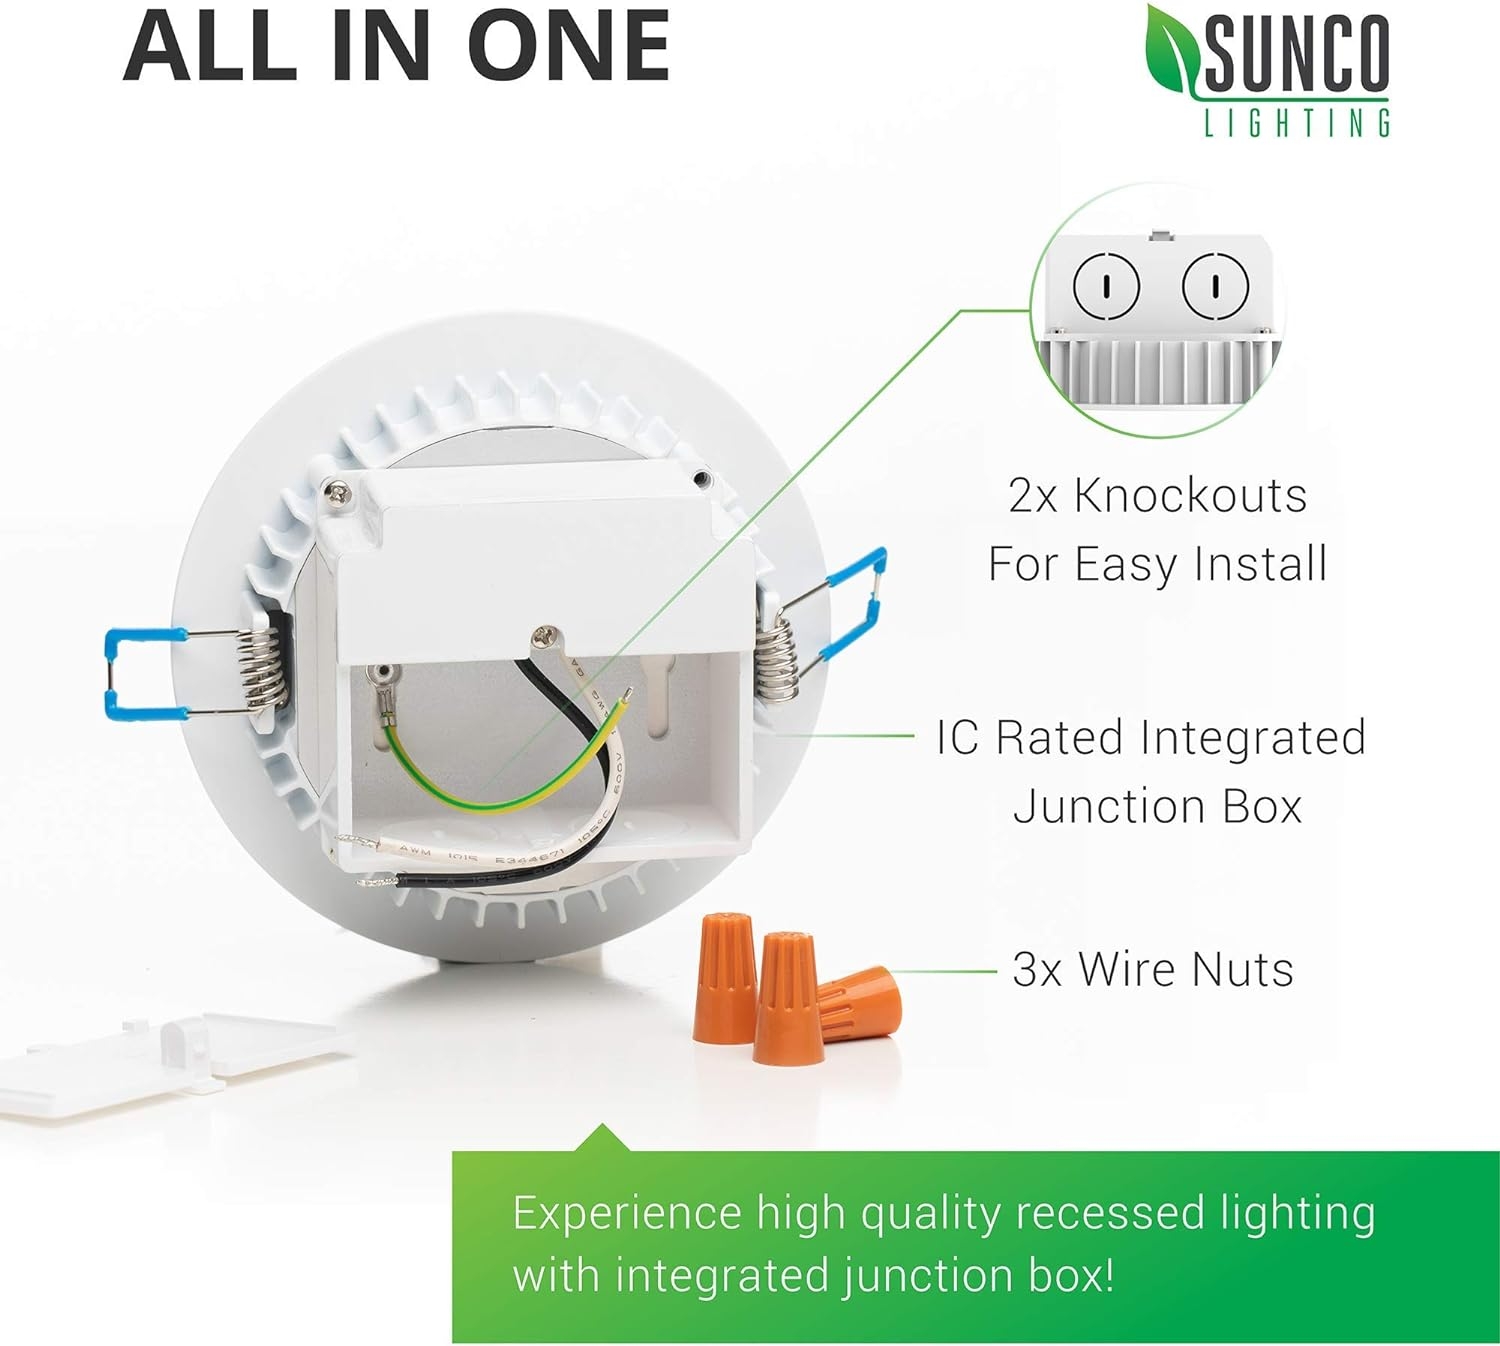 Sunco Lighting 12 Pack 4 Inch Slim LED Downlight, Integrated Junction Box,10W=60W, 650 LM, Dimmable, 2700K Soft White, Recessed Jbox Fixture, IC Rated, Simple Retrofit Installation - ETL & Energy Star